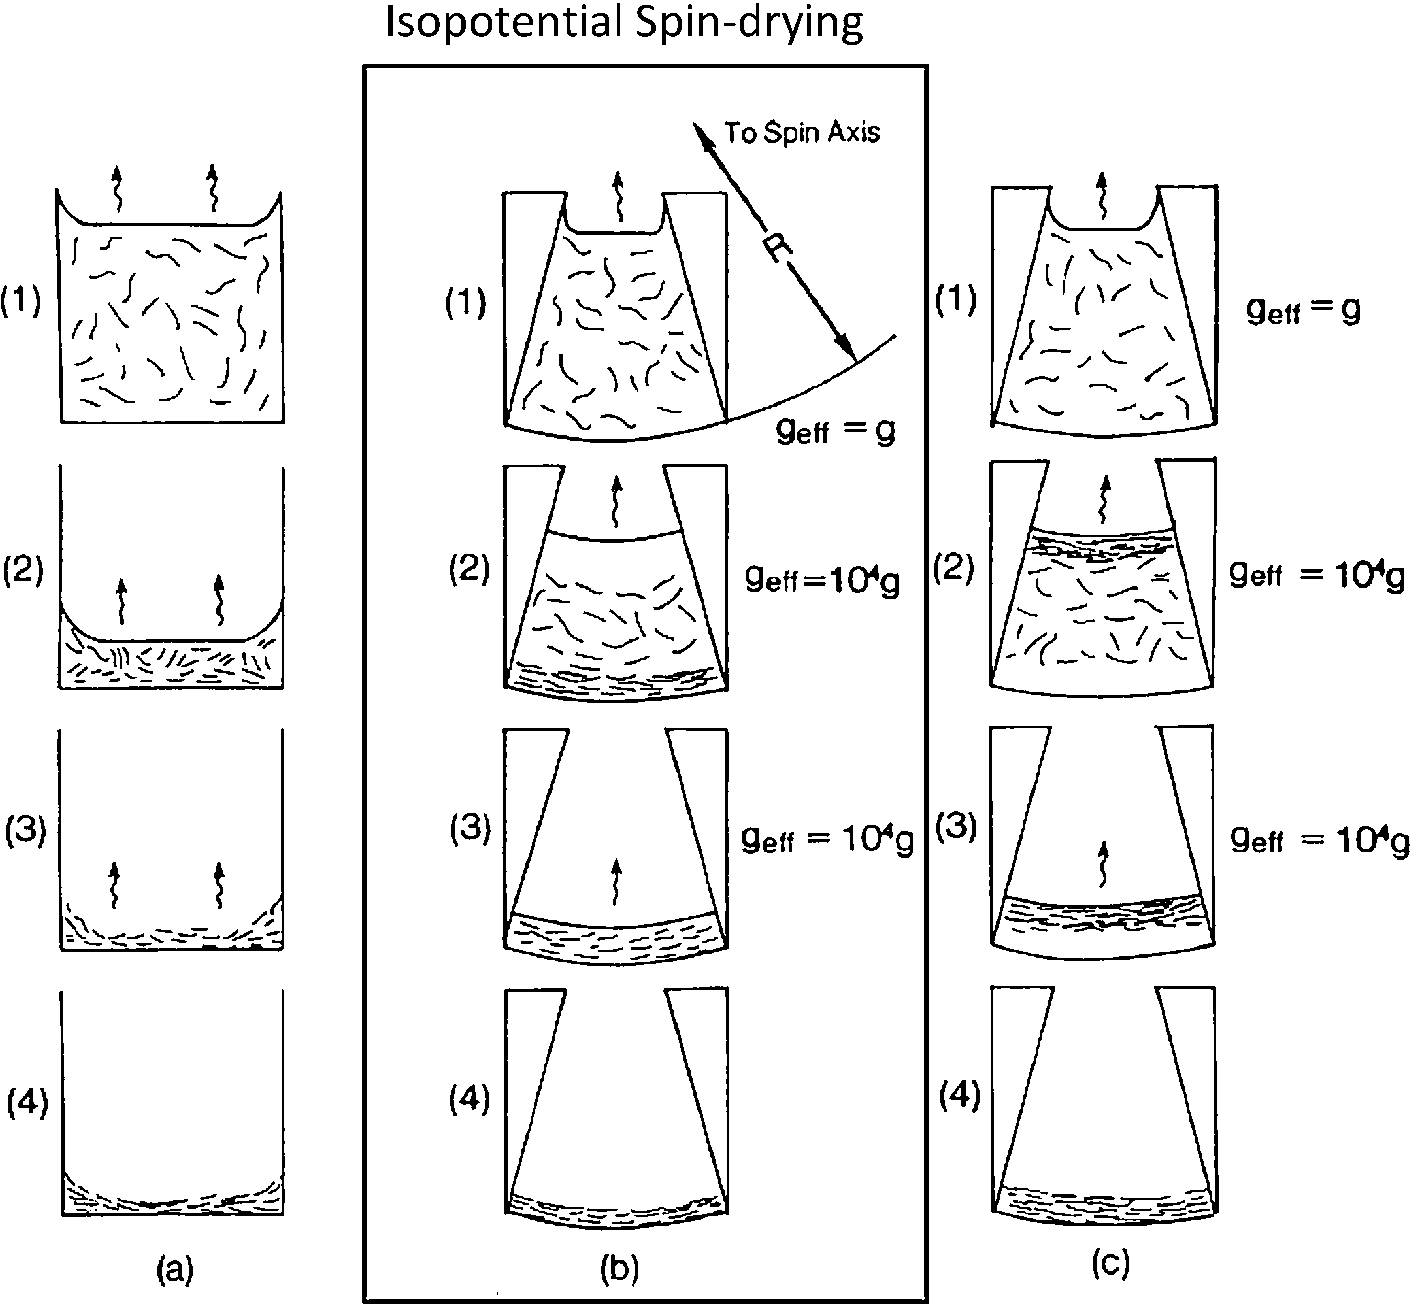 Comparison of different methods of orienting membrane sheets including: (a) drying without centrifugation, (b) isopotential spin-drying (ISD) where both drying and centrifugation occur and (c) example of ISD where biological membrane fragments are less dense than the suspending medium (adapted from [57]).